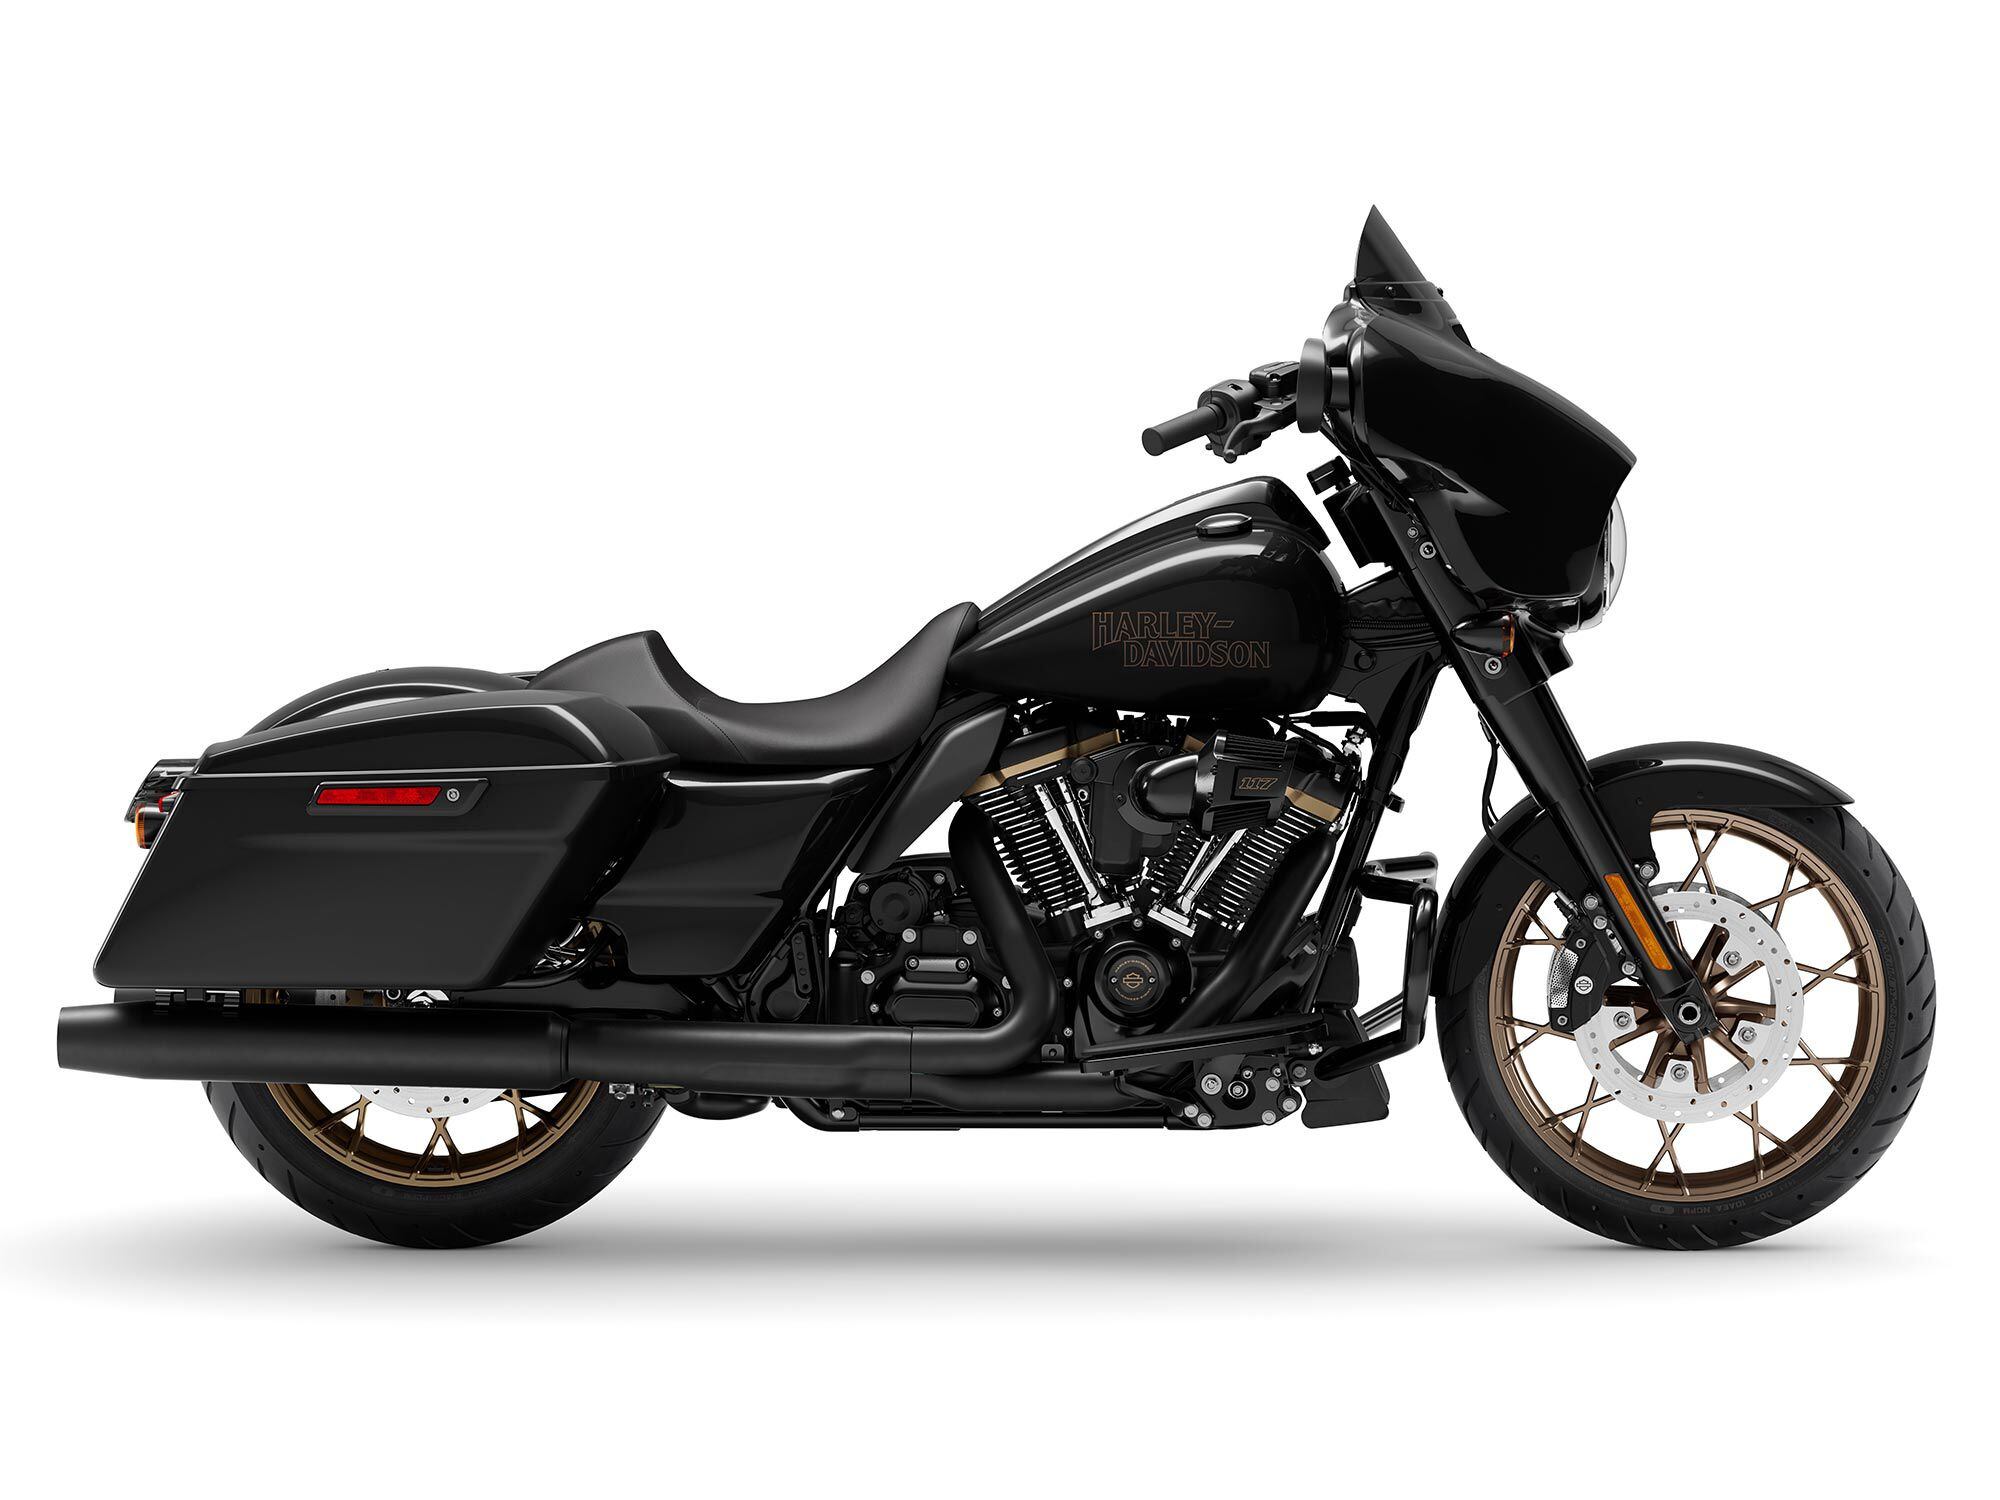 The current-generation Street Glide ST.